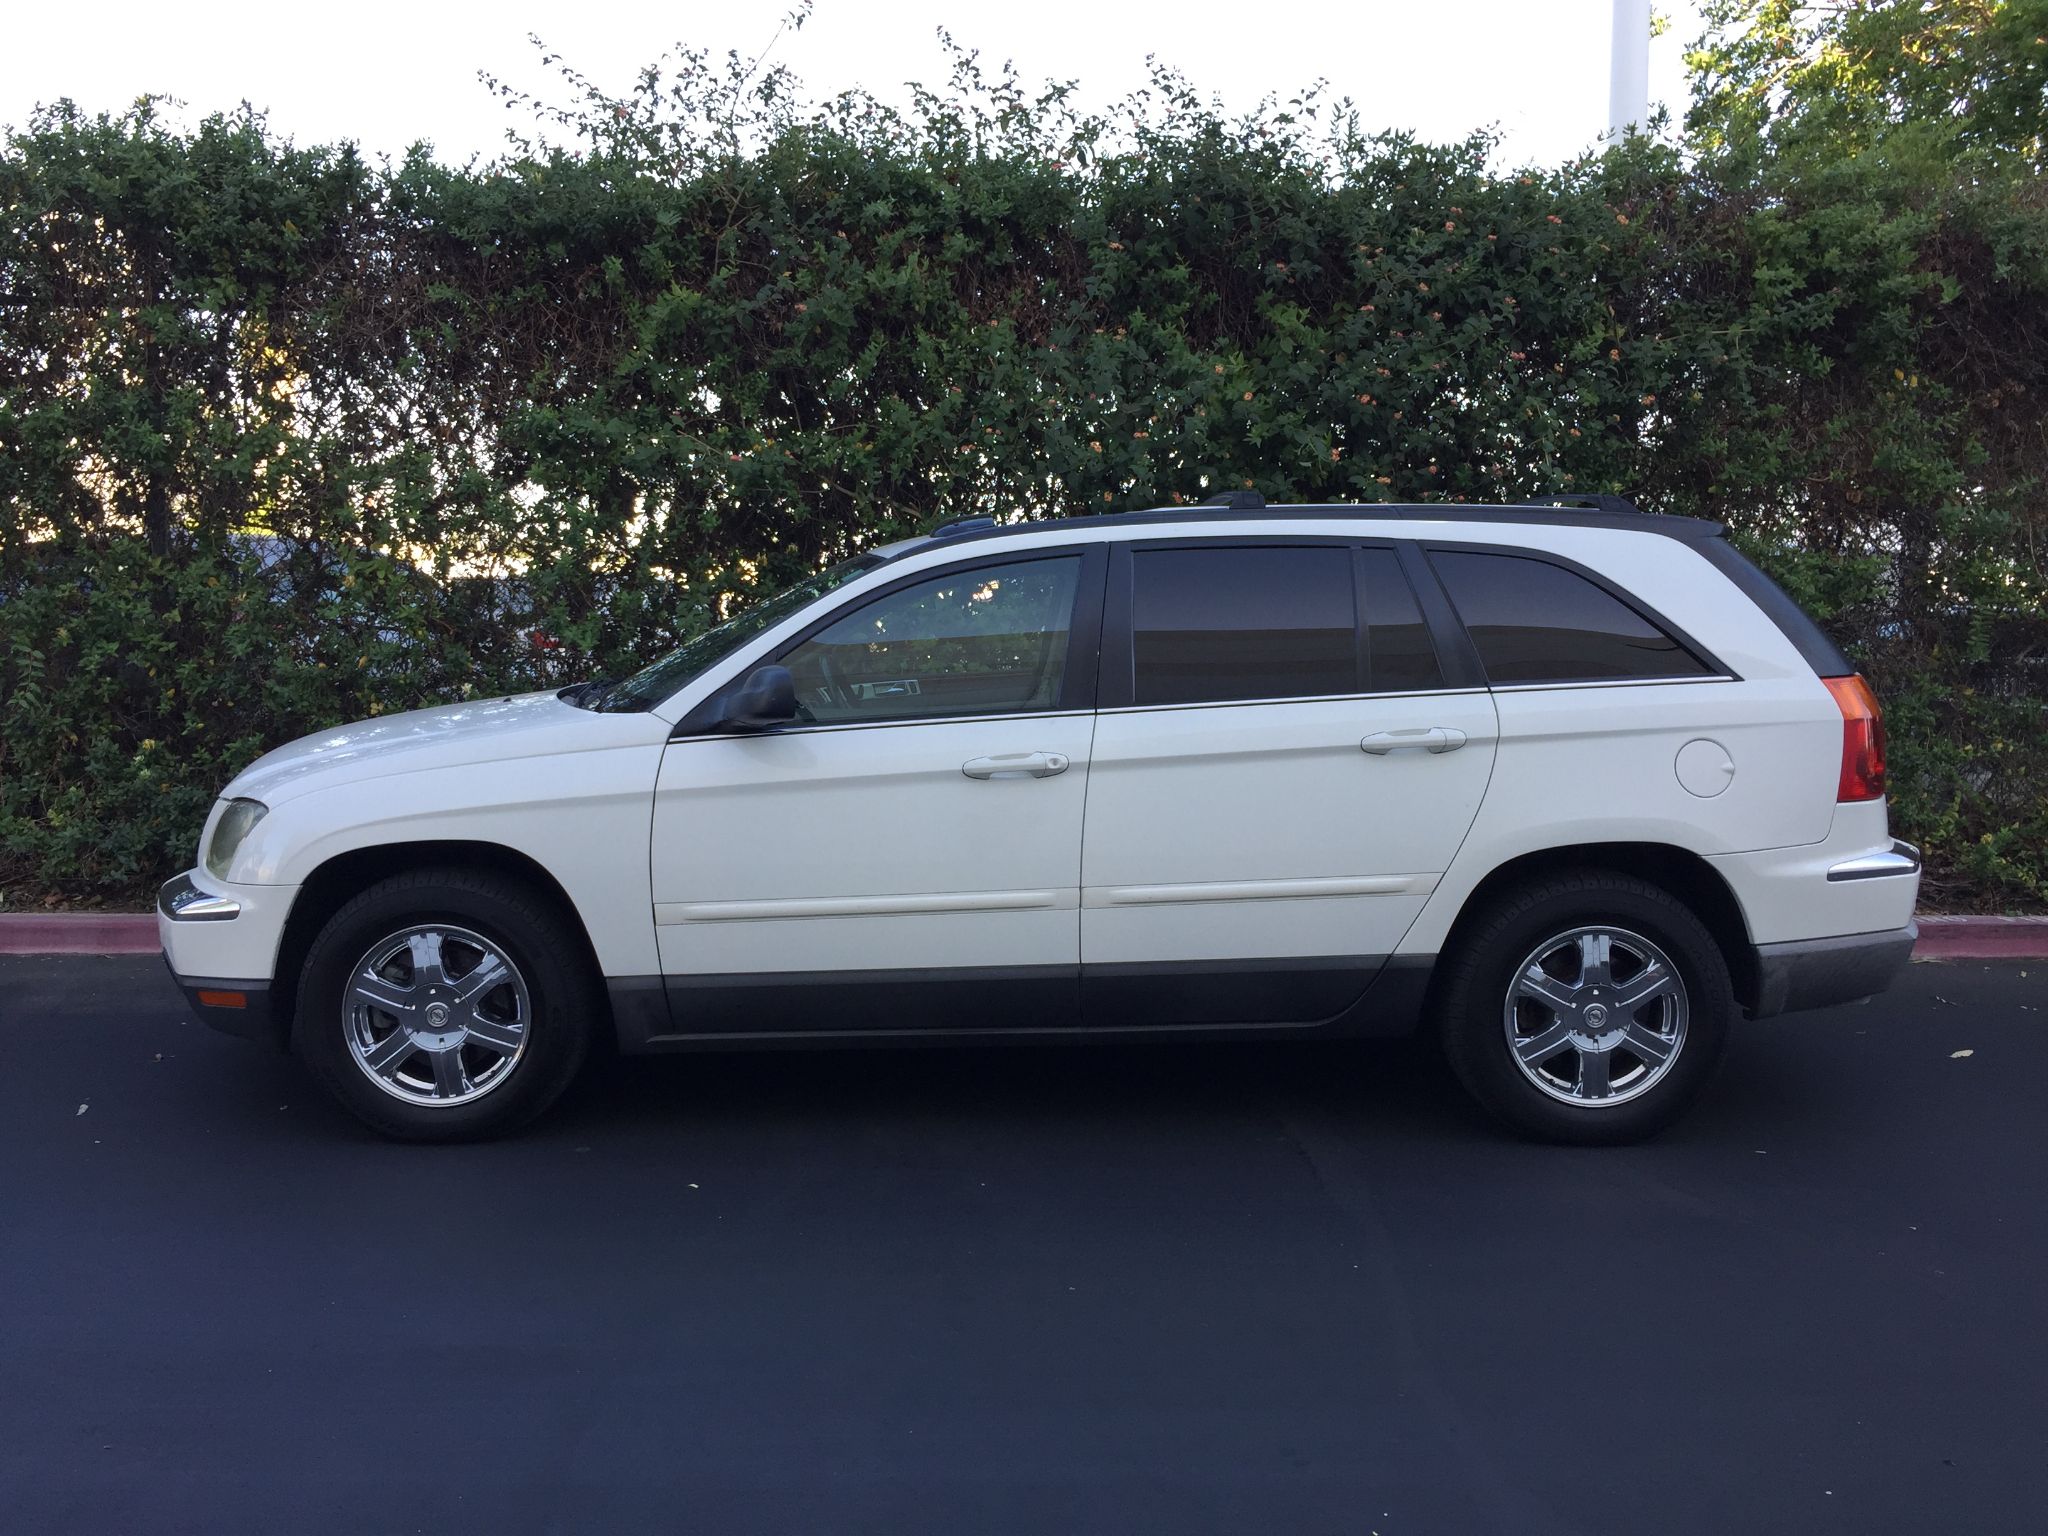 Used 2005 Chrysler Pacifica Touring at City Cars Warehouse INC